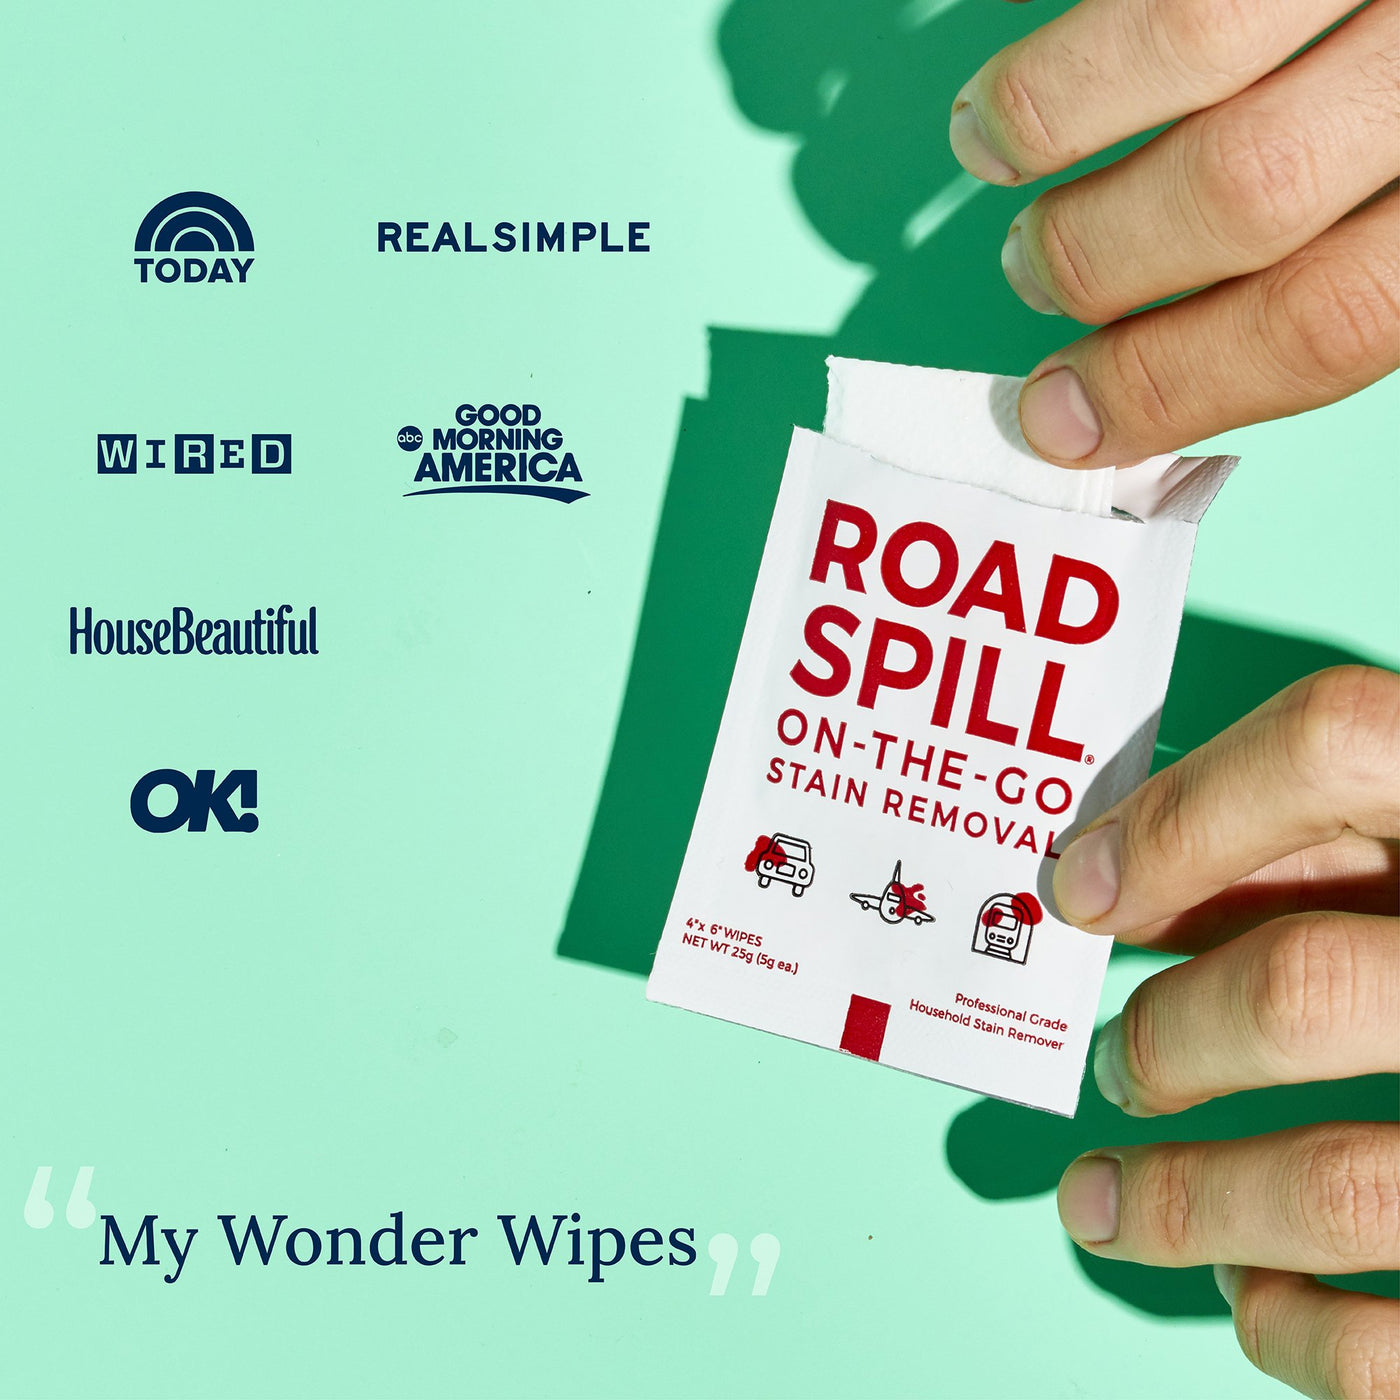 Road Spill On-The-Go Stain Removal 5-Pack Wipes